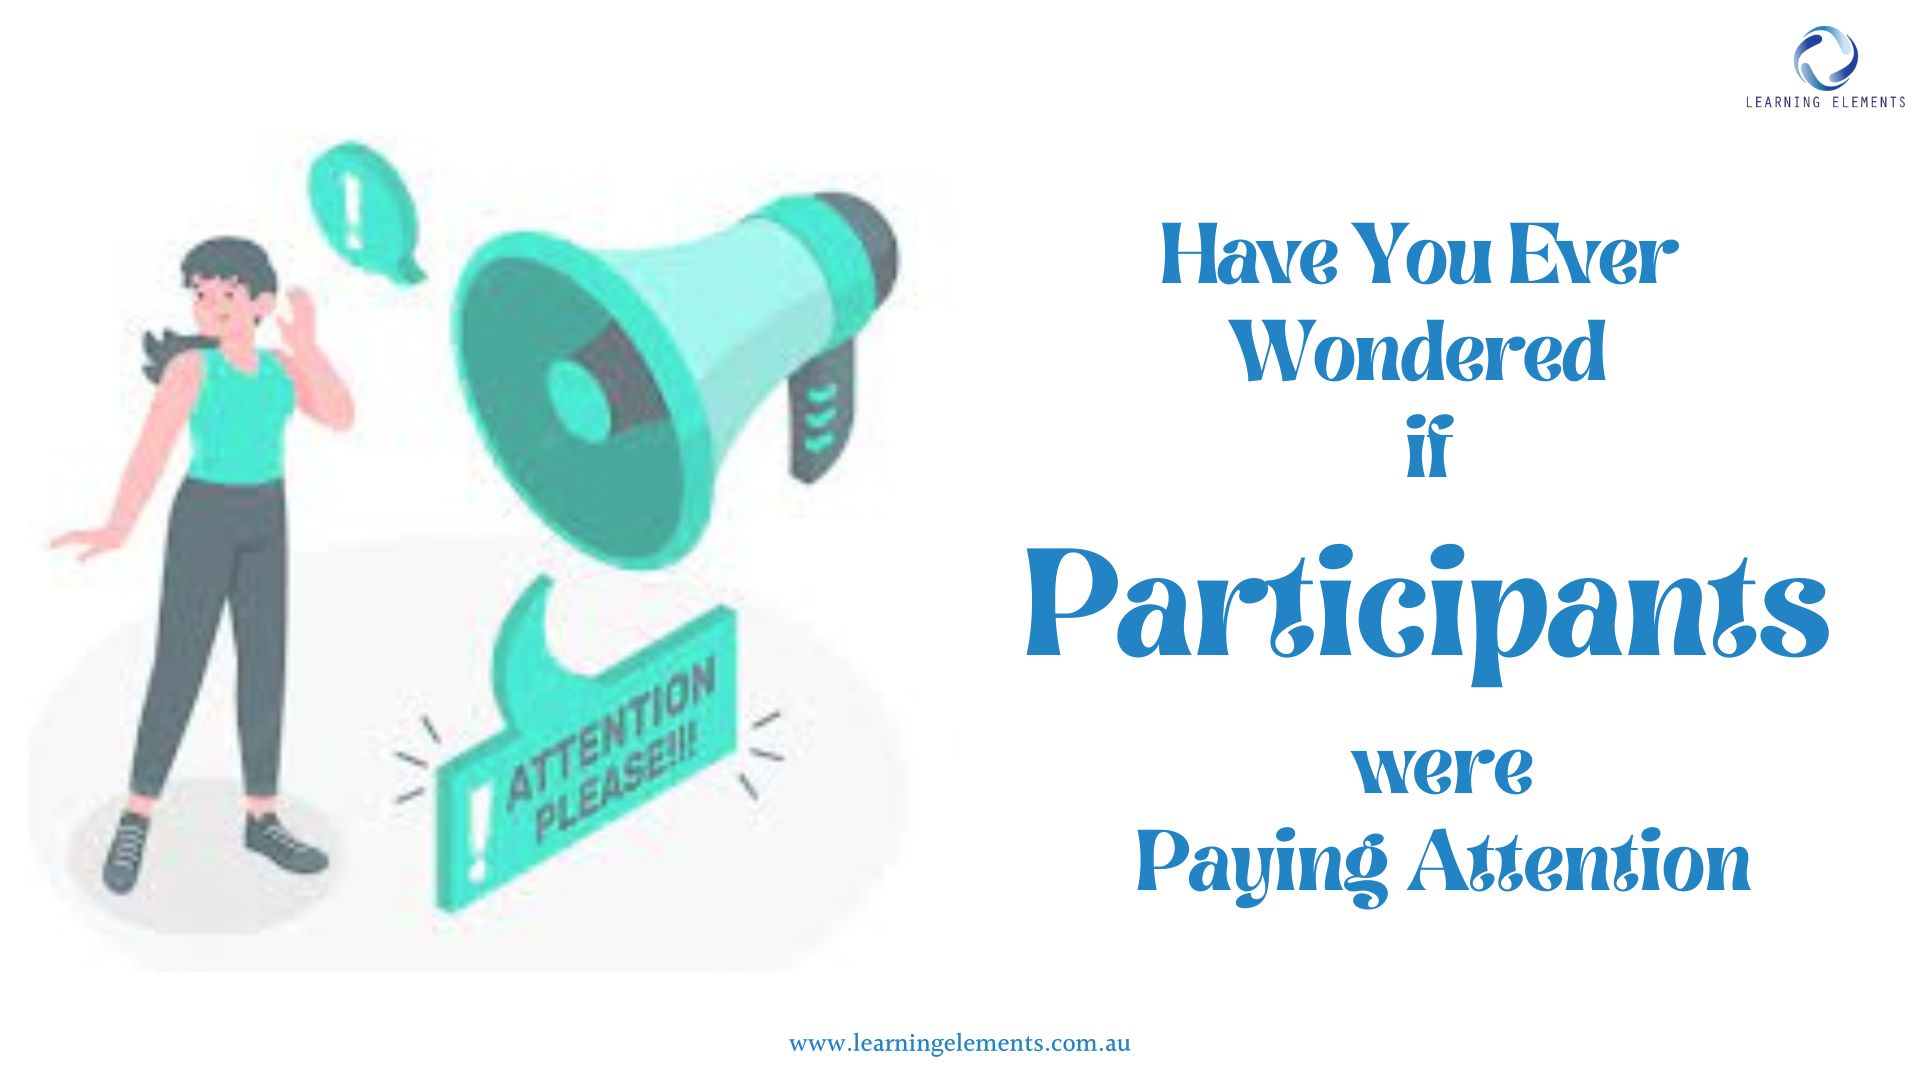 Have You Ever Wondered if Participants were Paying Attention in online training or webinar